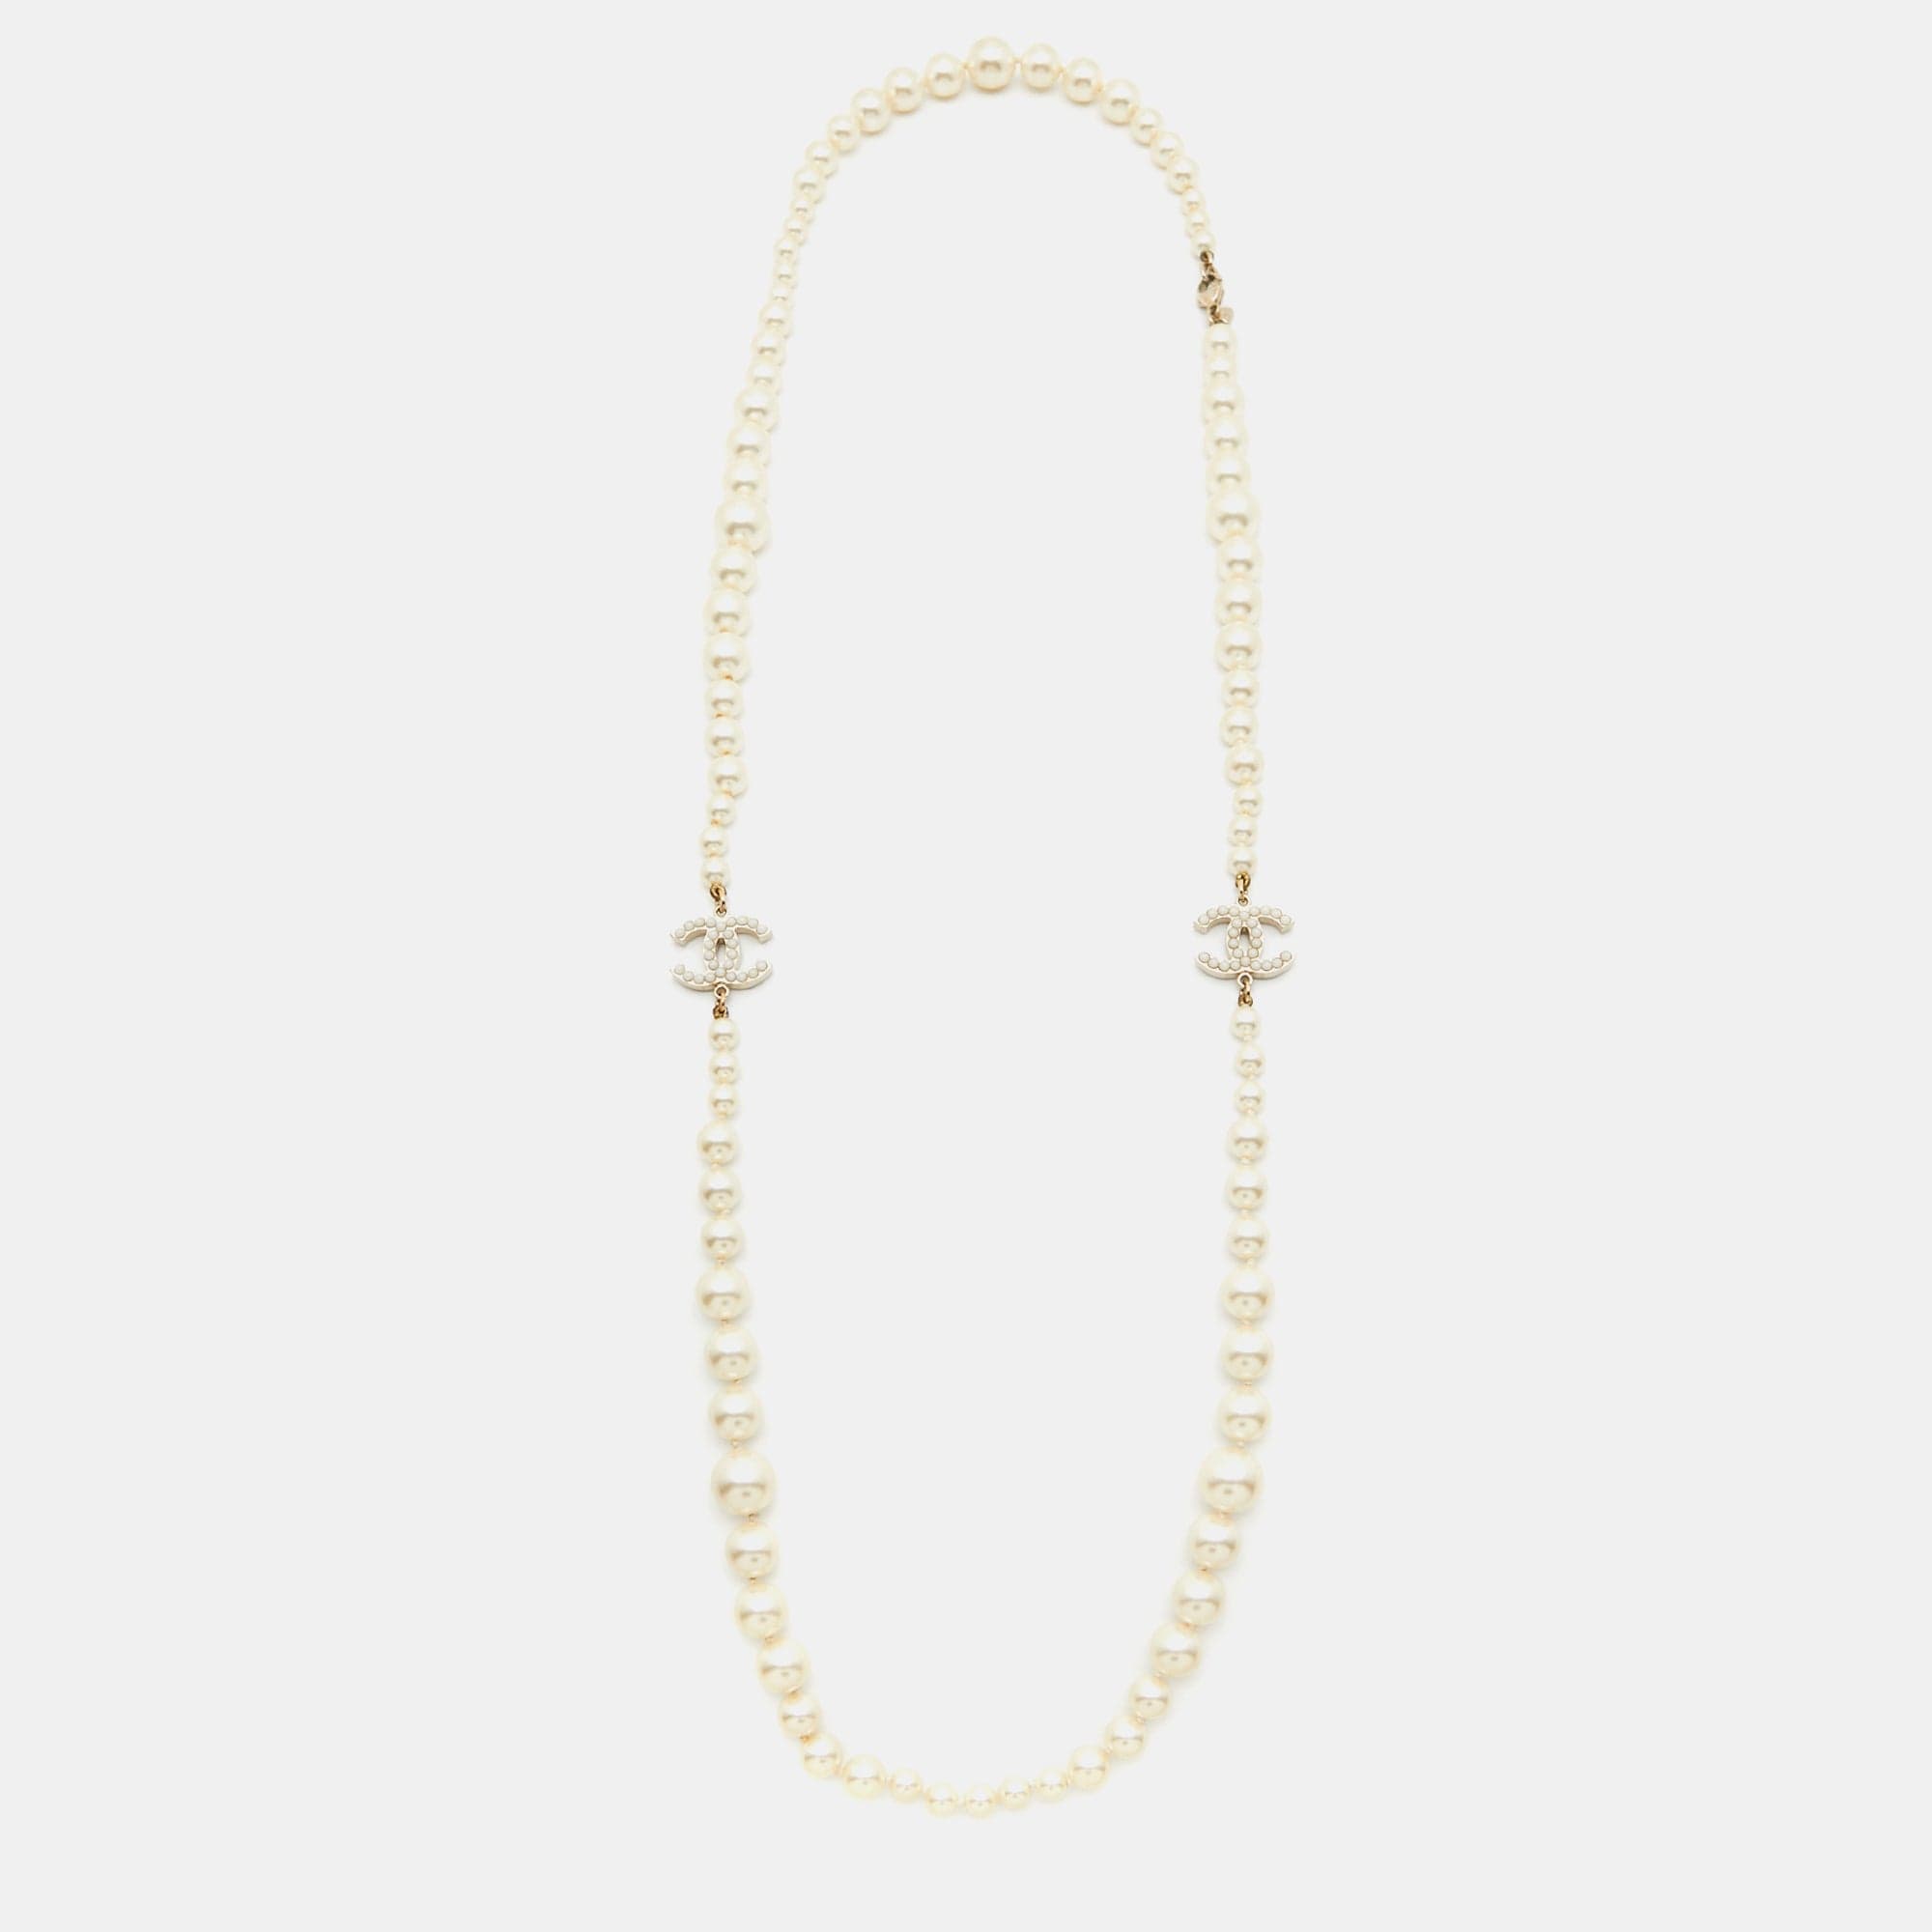 Chanel Chanel Pearl Necklace ASCLC2459